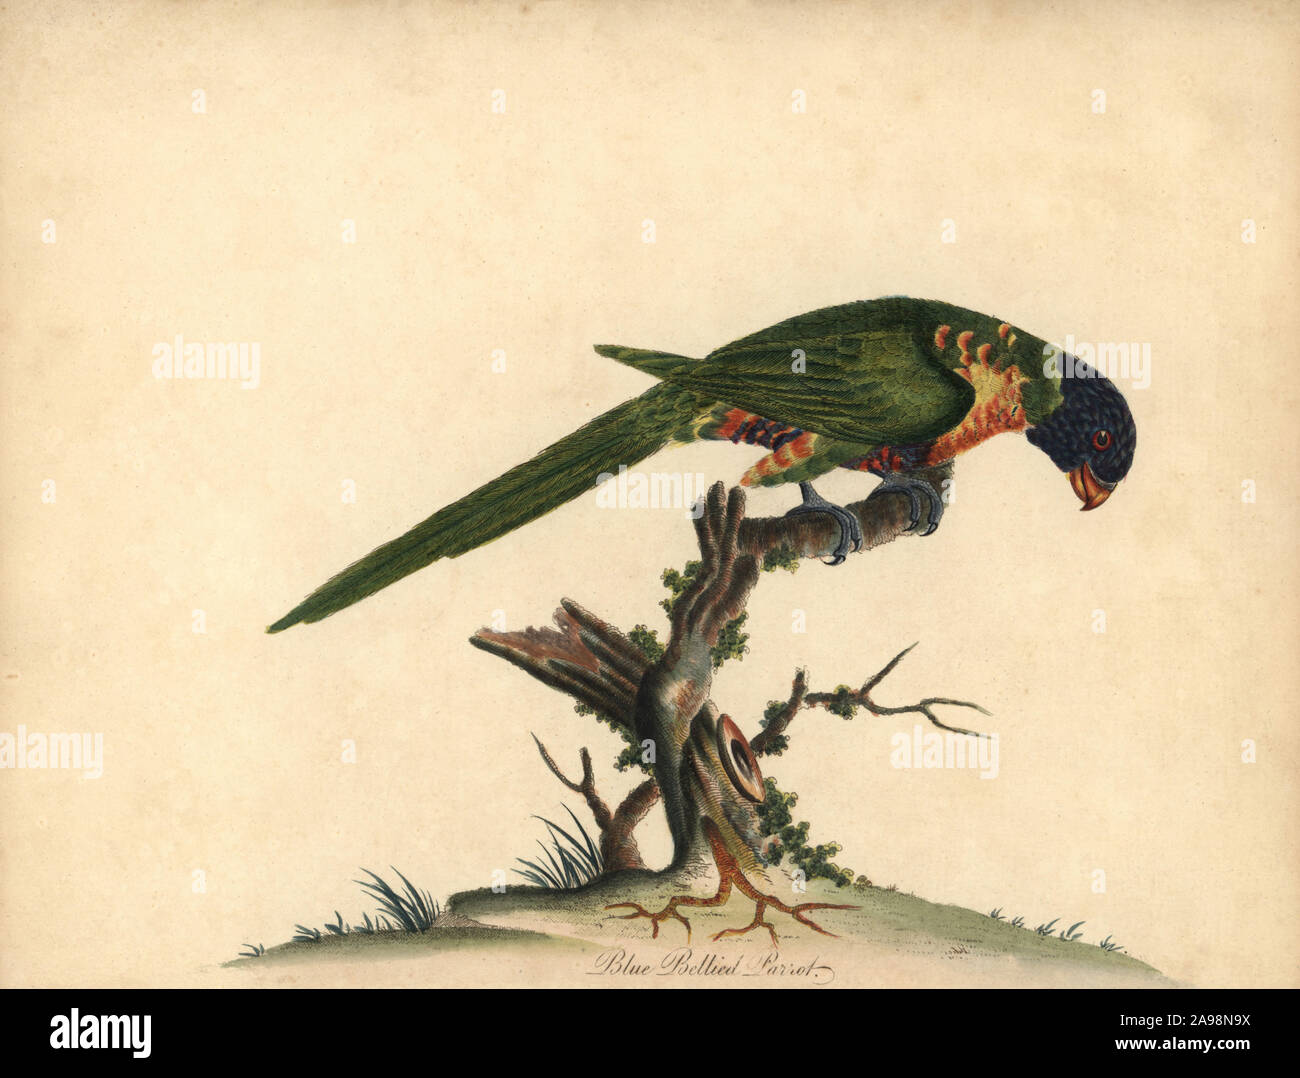 Rainbow lorikeet, Trichoglossus moluccanus. Blue-bellied parrot. Handcoloured copperplate engraving of an illustration by William Hayes from Portraits of Rare and Curious Birds from the Menagery of Osterly Park, London, Bulmer, 1794. Stock Photo